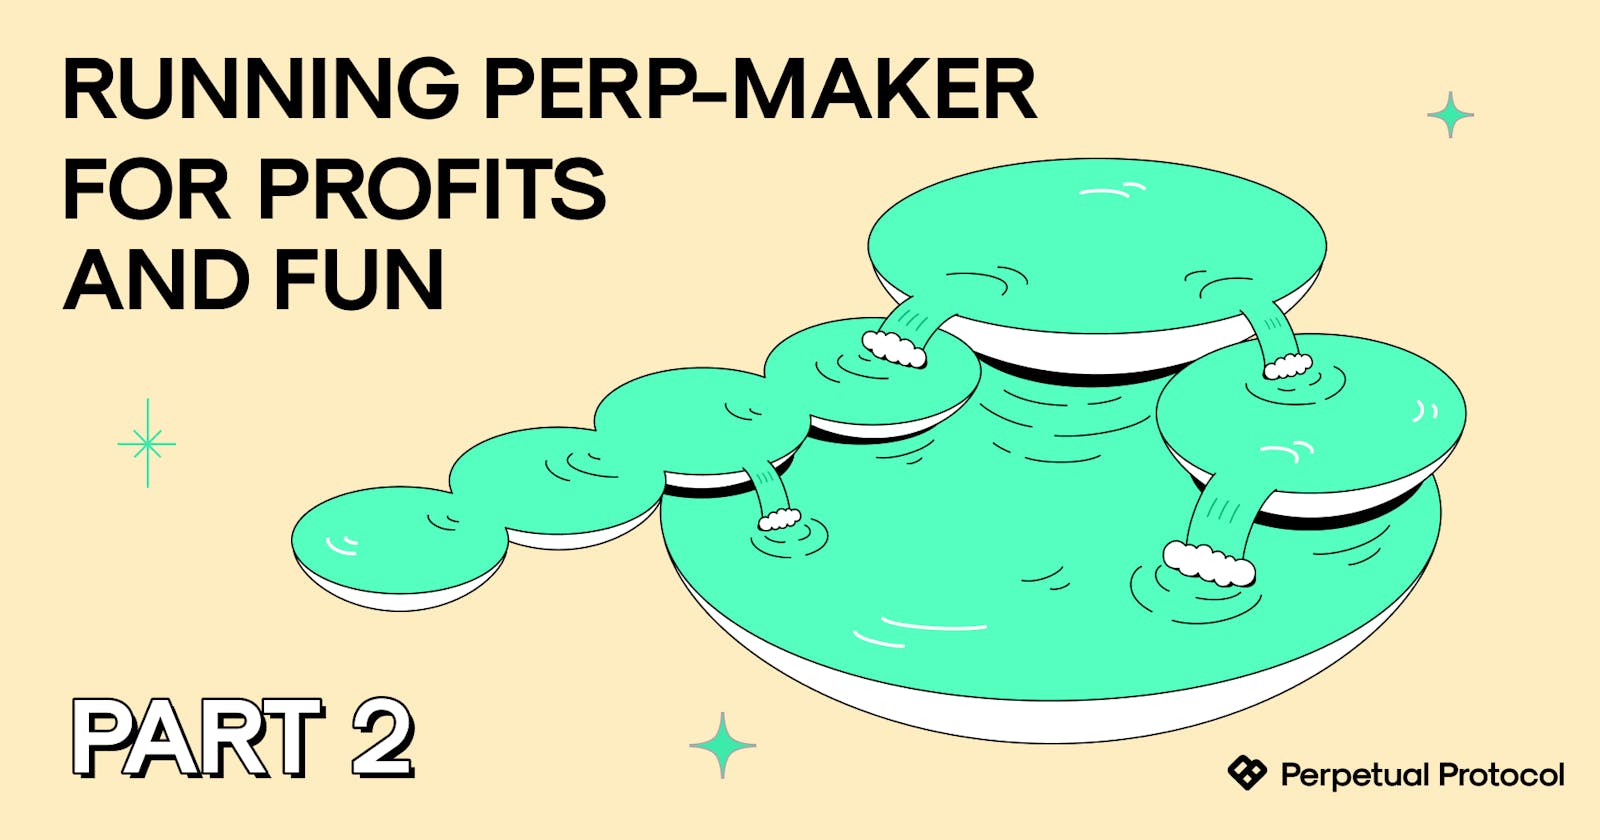 Running Perp-maker for Profits and Fun: Part 2